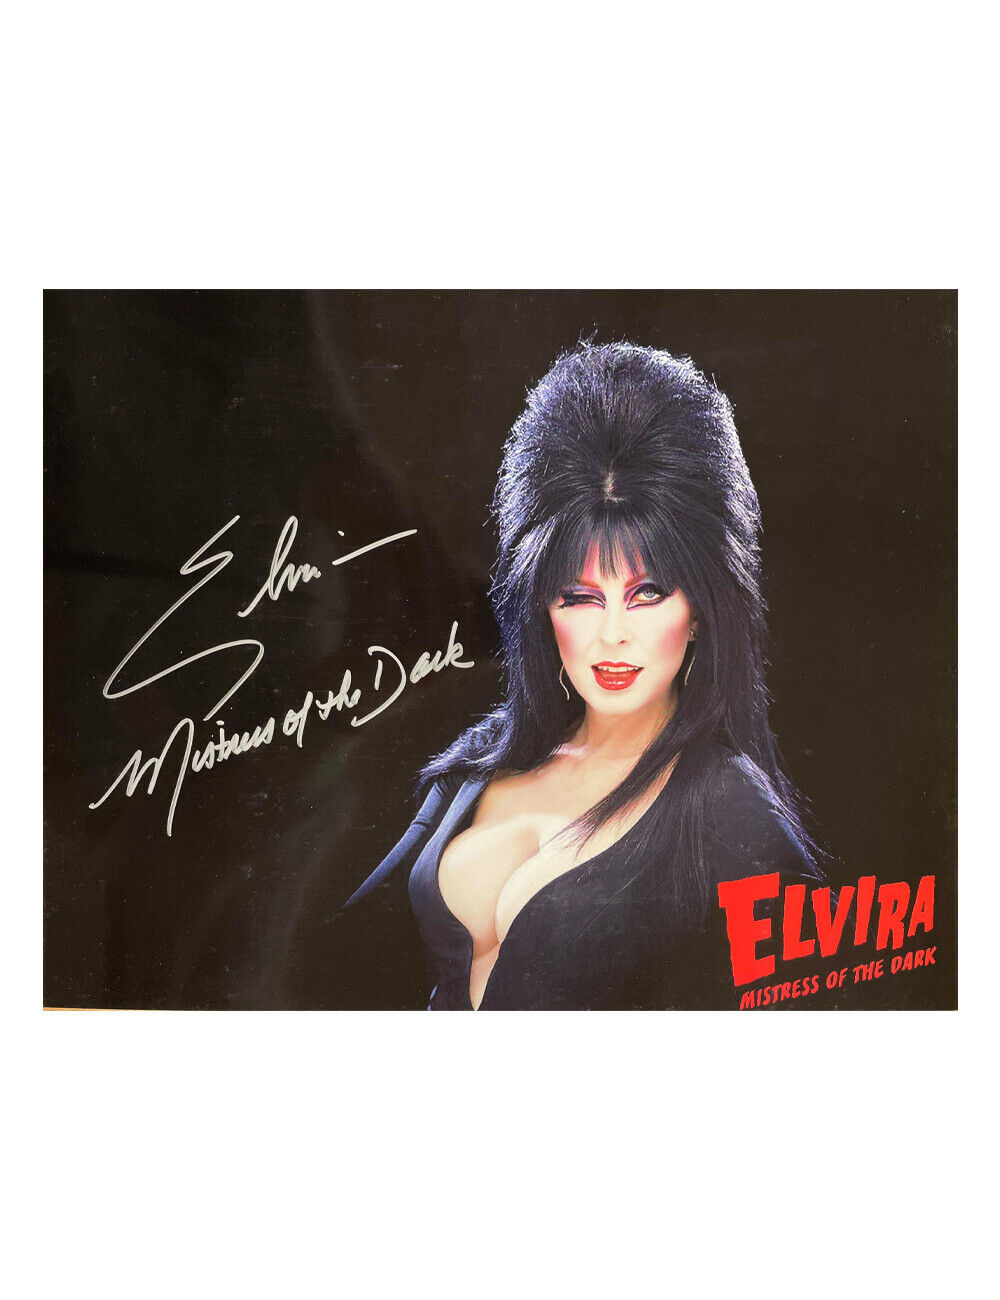 16x12 Elvira Print Signed by Cassandra Peterson 100% Authentic With COA